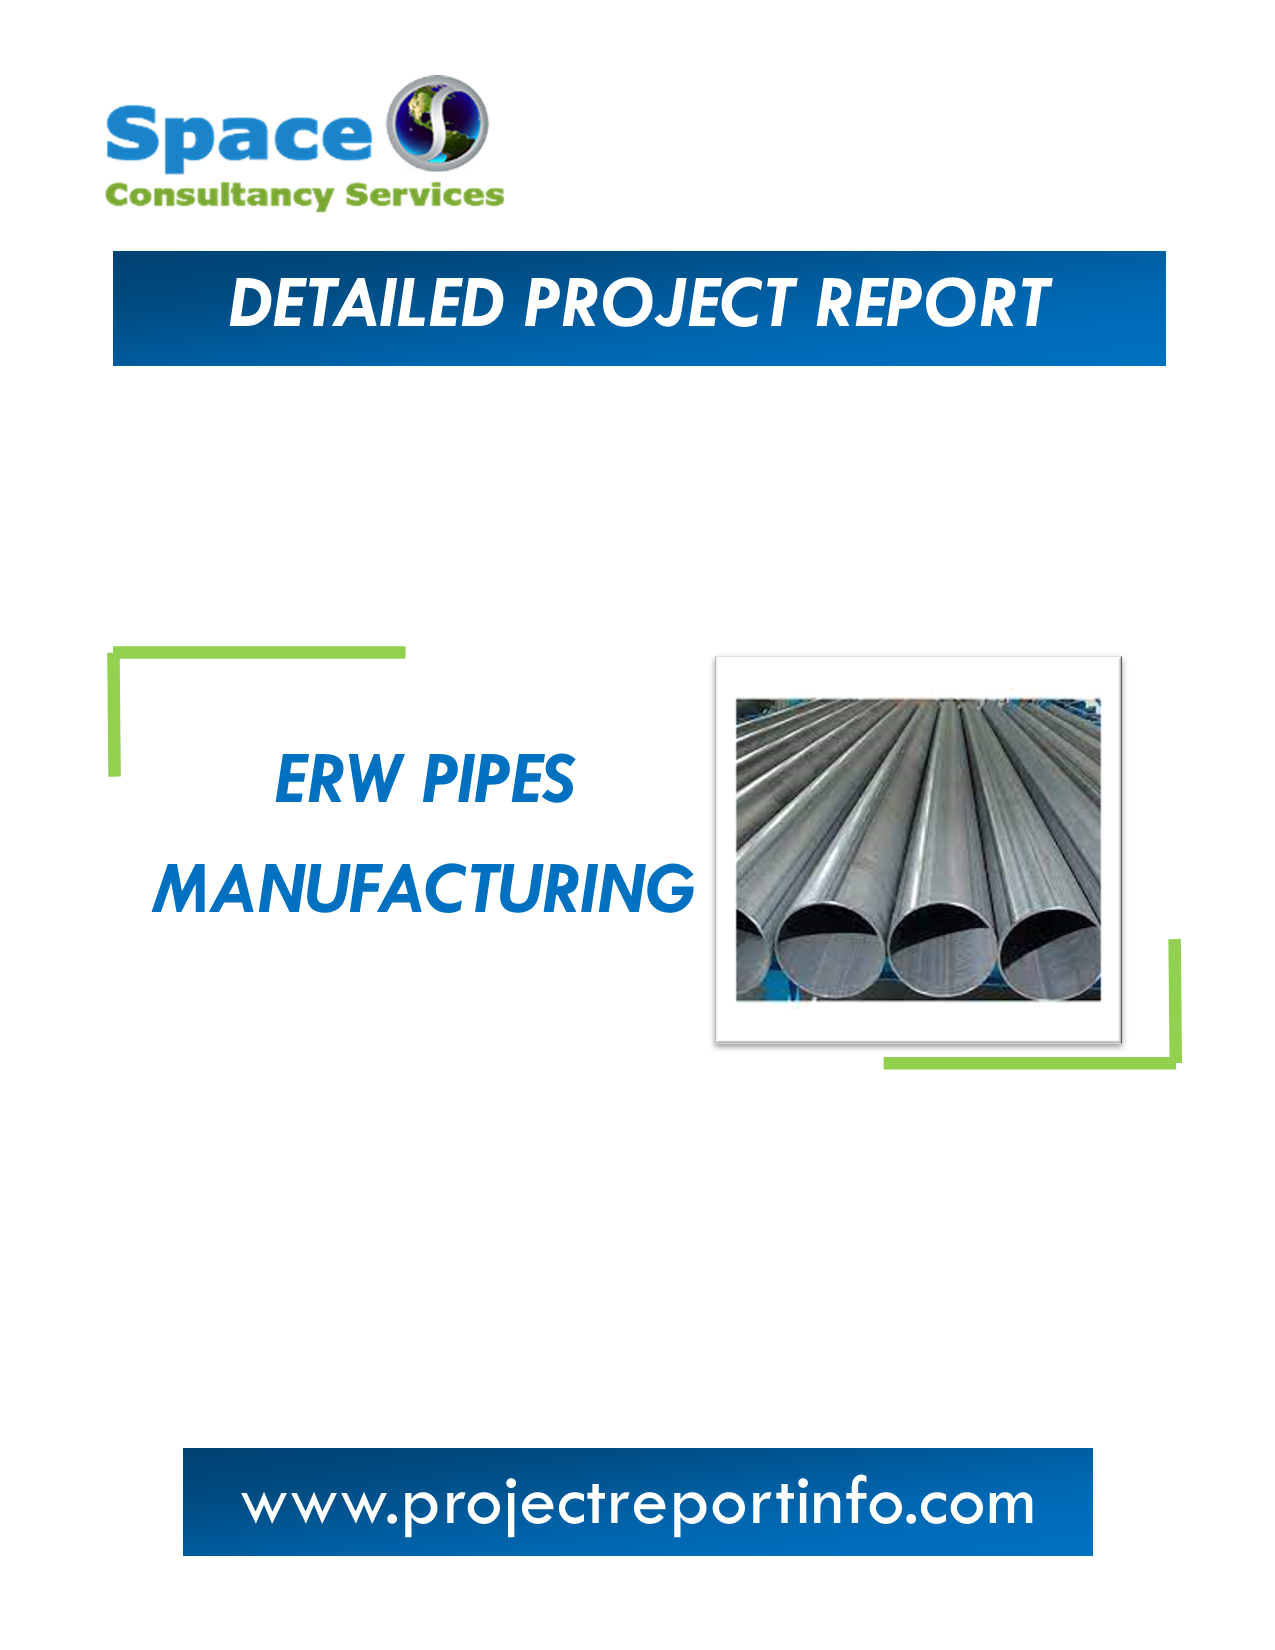 Project Report on ERW Pipes Manufacturing